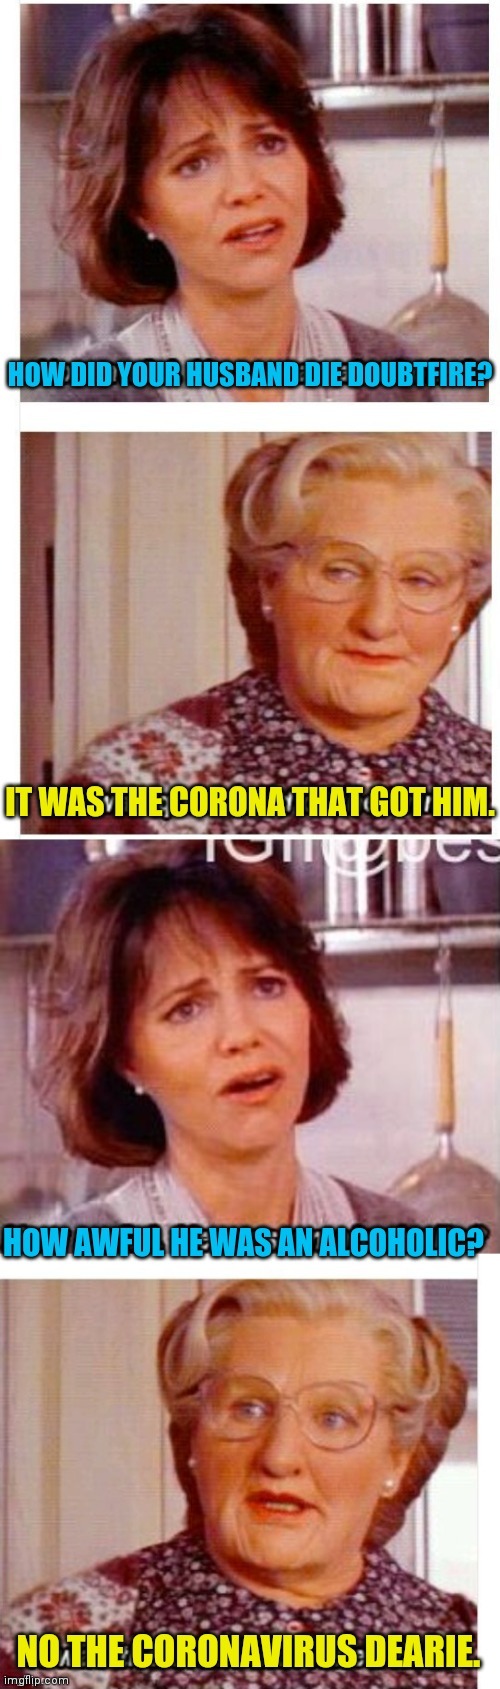 Mrs.Doubtfire And Corona | image tagged in mrs doubtfire,coronavirus,corona,corona virus | made w/ Imgflip meme maker